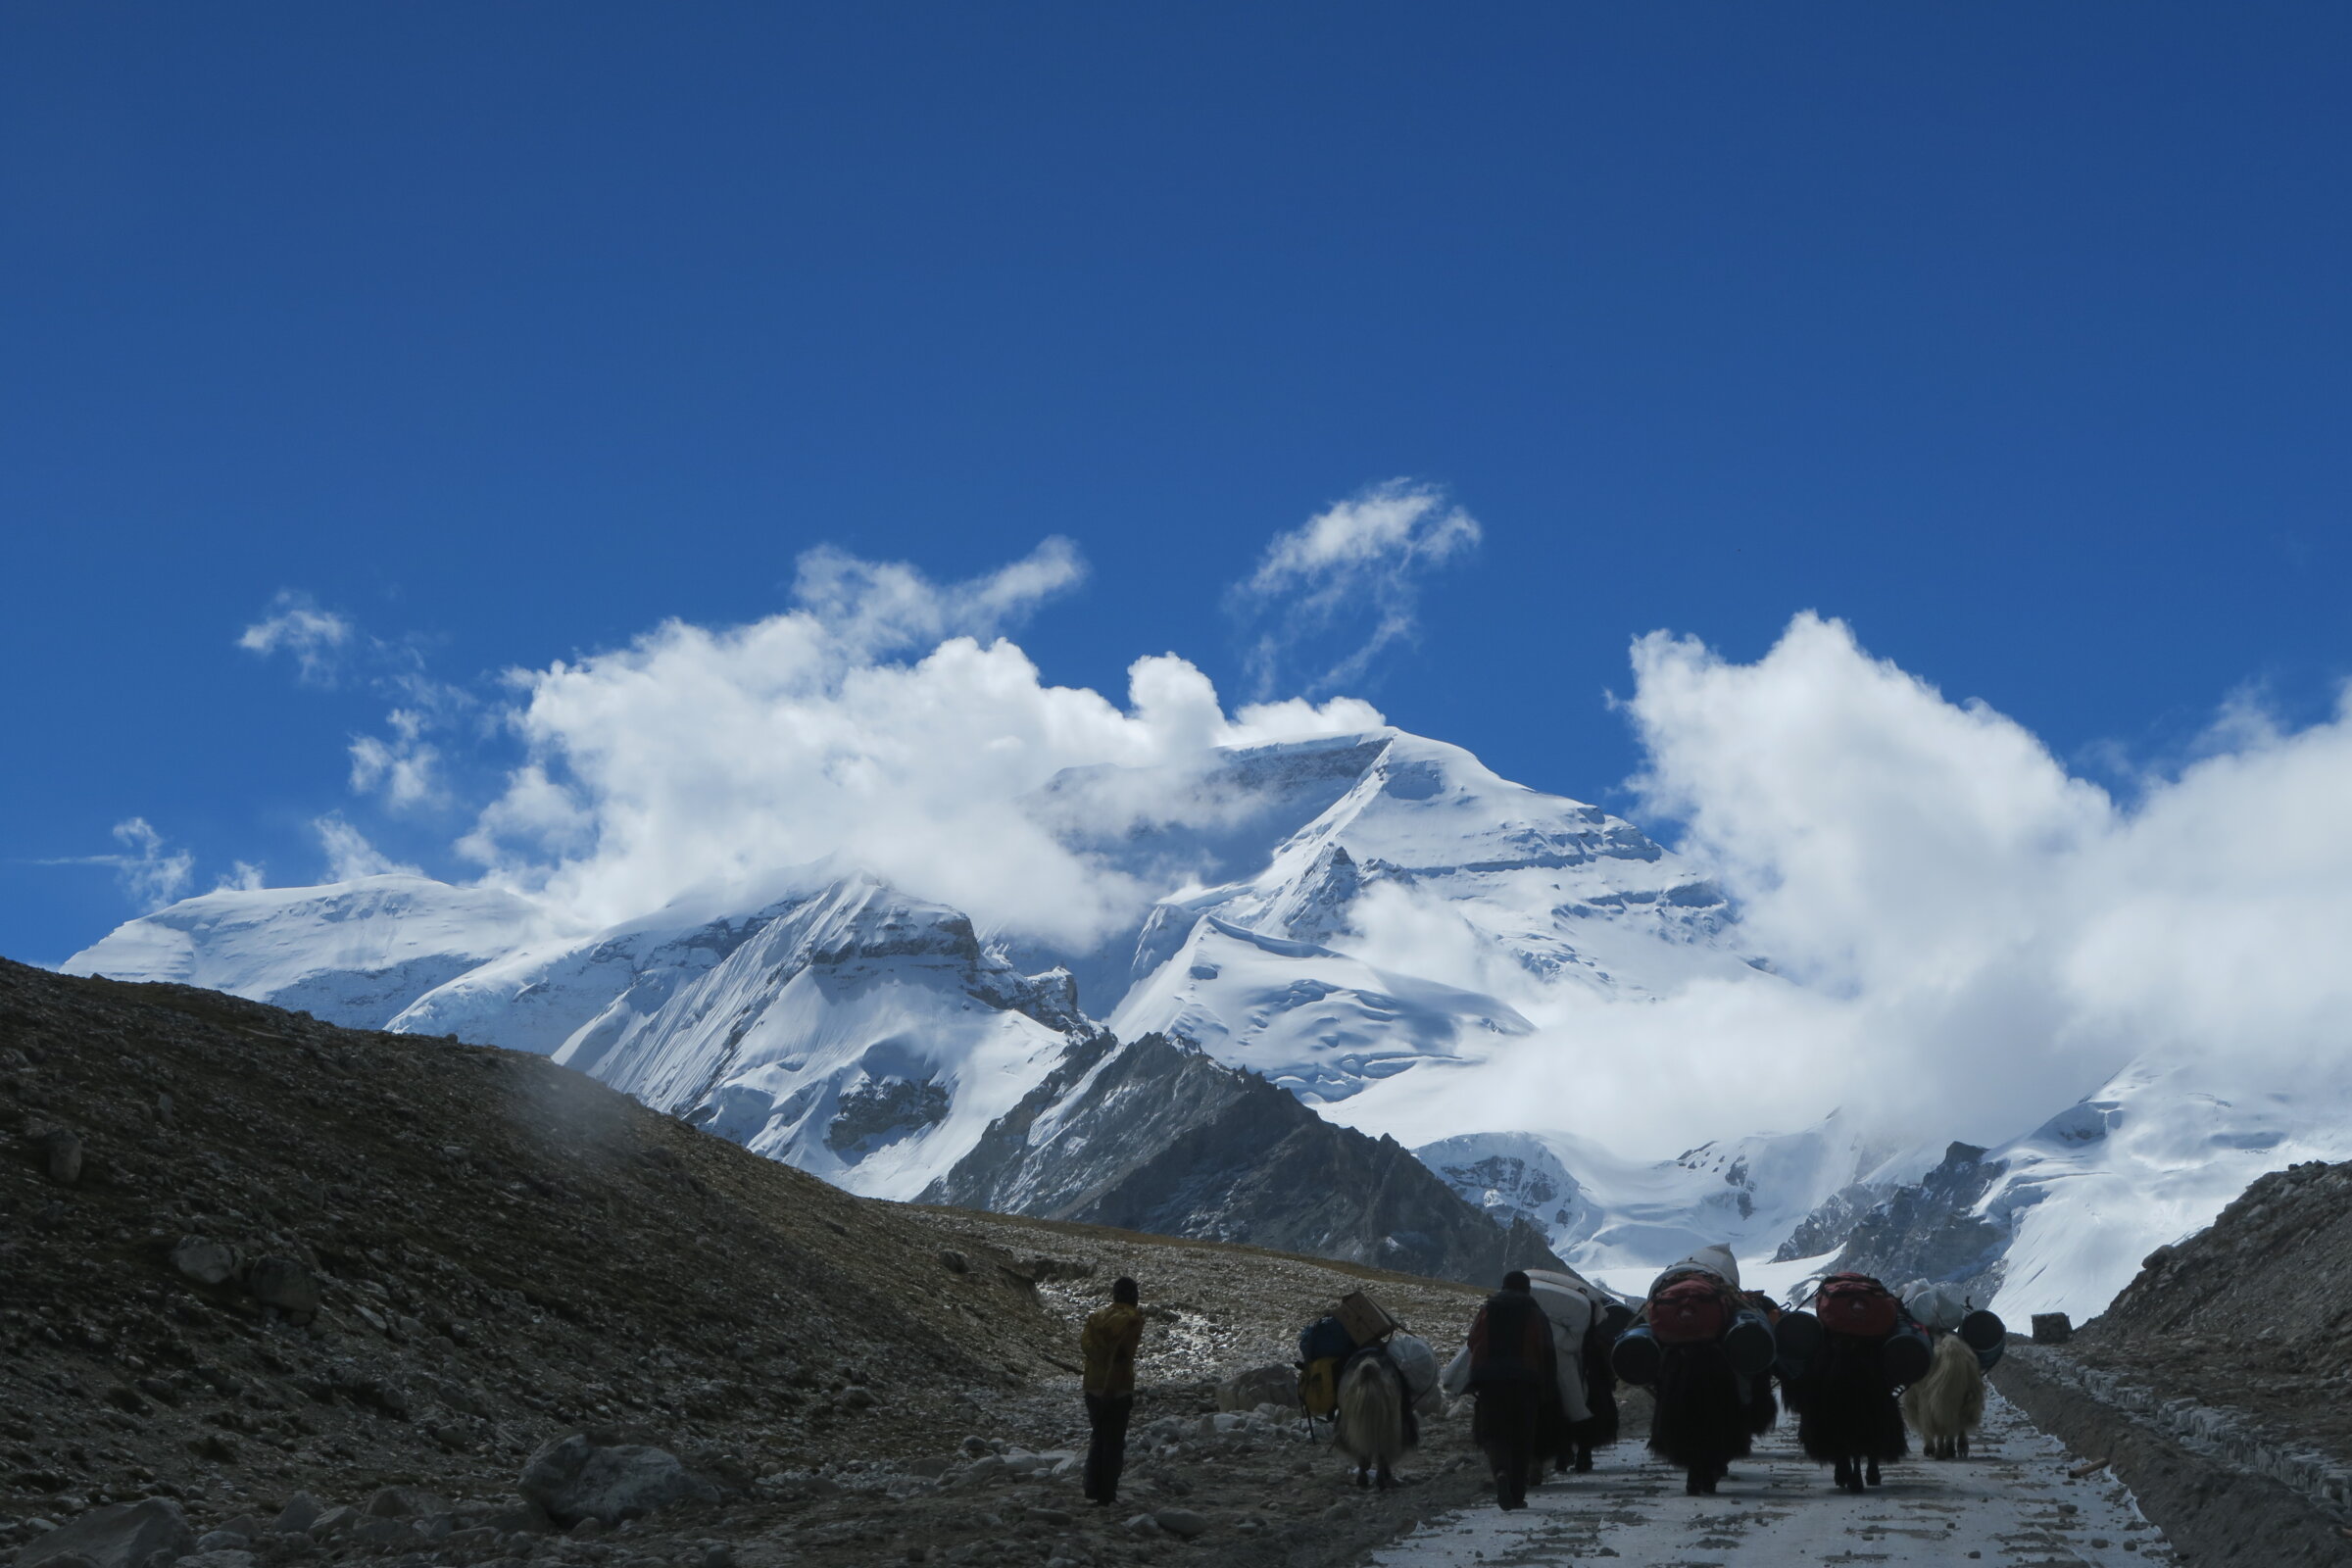 Yaks walking on a road with Cho Oyu in the background during a guided expedition with Alpenglow Expeditions.